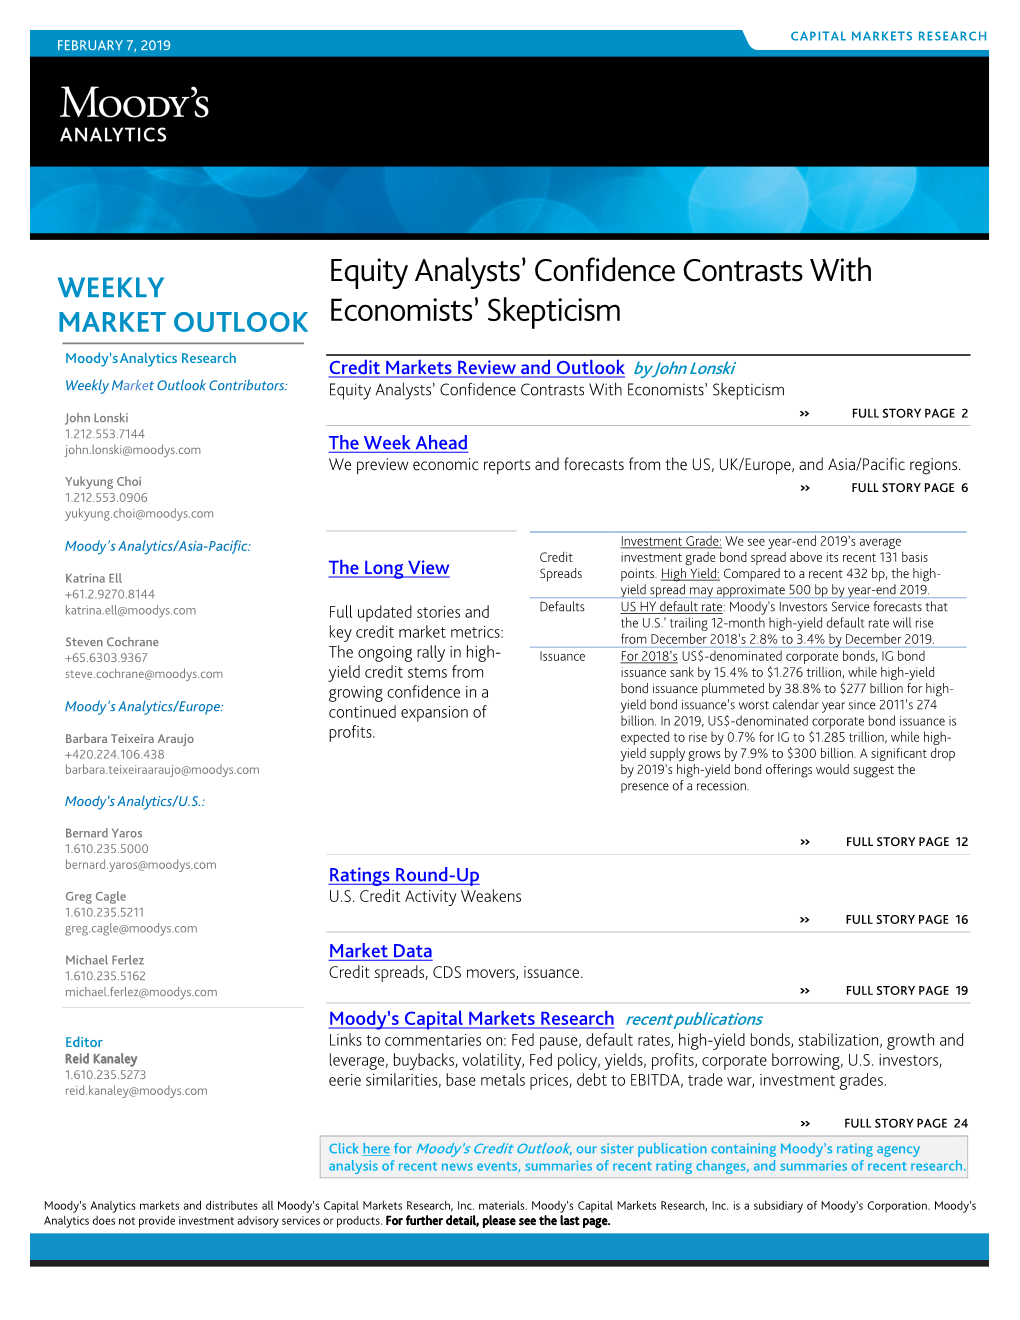 Equity Analysts' Confidence Contrasts with Economists' Skepticism